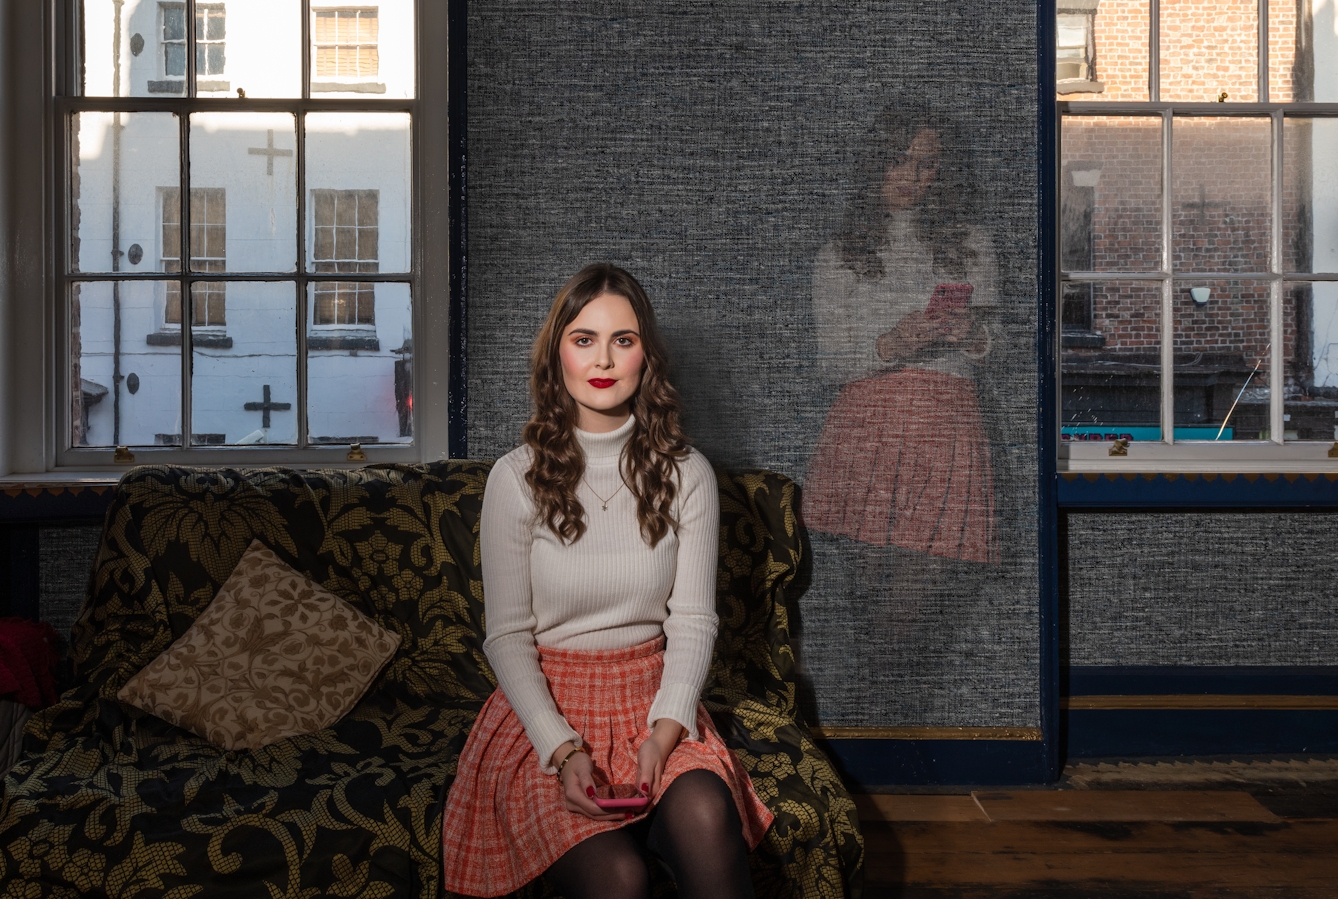 A portrait of Emily Bashforth sitting on a patterned sofa. She is wearing a cream jumper, orange plaid skirt, red lipstick and is holding a pink iPhone. She has long brown wavy hair and is looking directly at the camera.

Behind the sofa are two windows, showing buildings outside. Between the windows, there is a panel on the wall where there is an image of Emily superimposed. She is standing up and looking at her phone. 